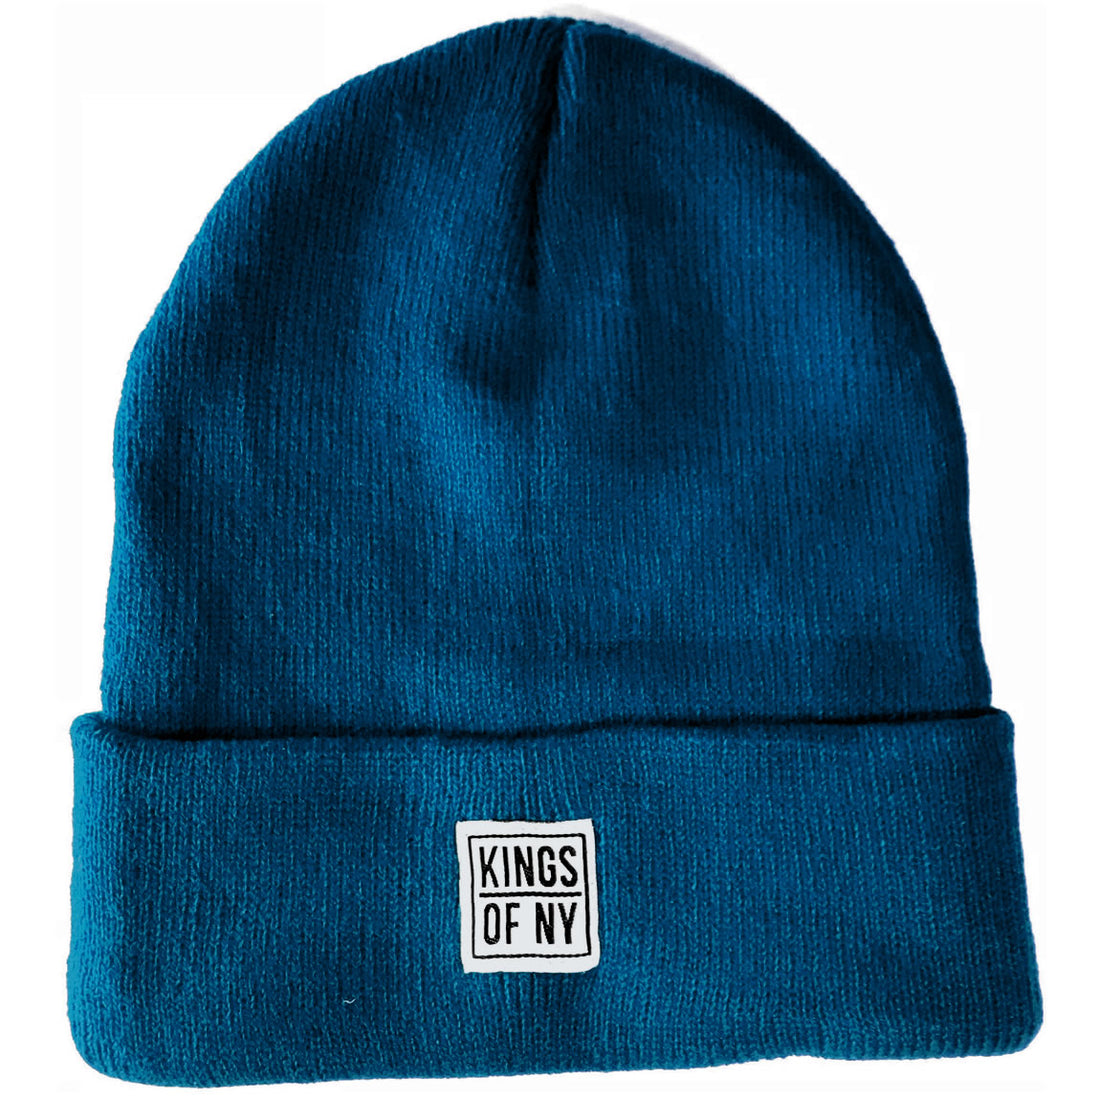 Cobalt Blue Beanie Hat by Kings Of NY